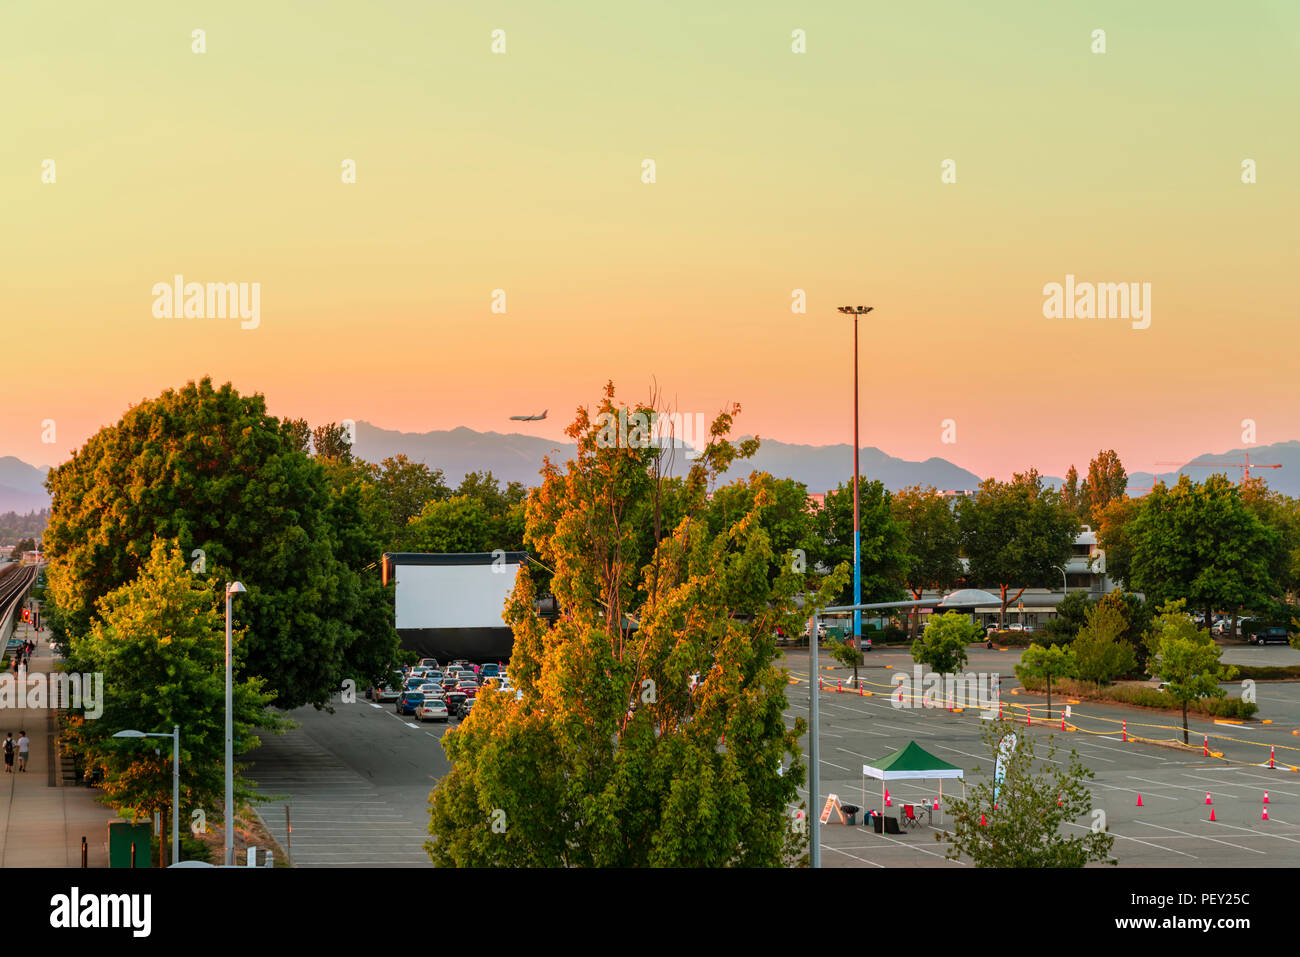 Car parking with summer cinema, green trees, mountains, flying plane, cars on summer evening in modern city Stock Photo